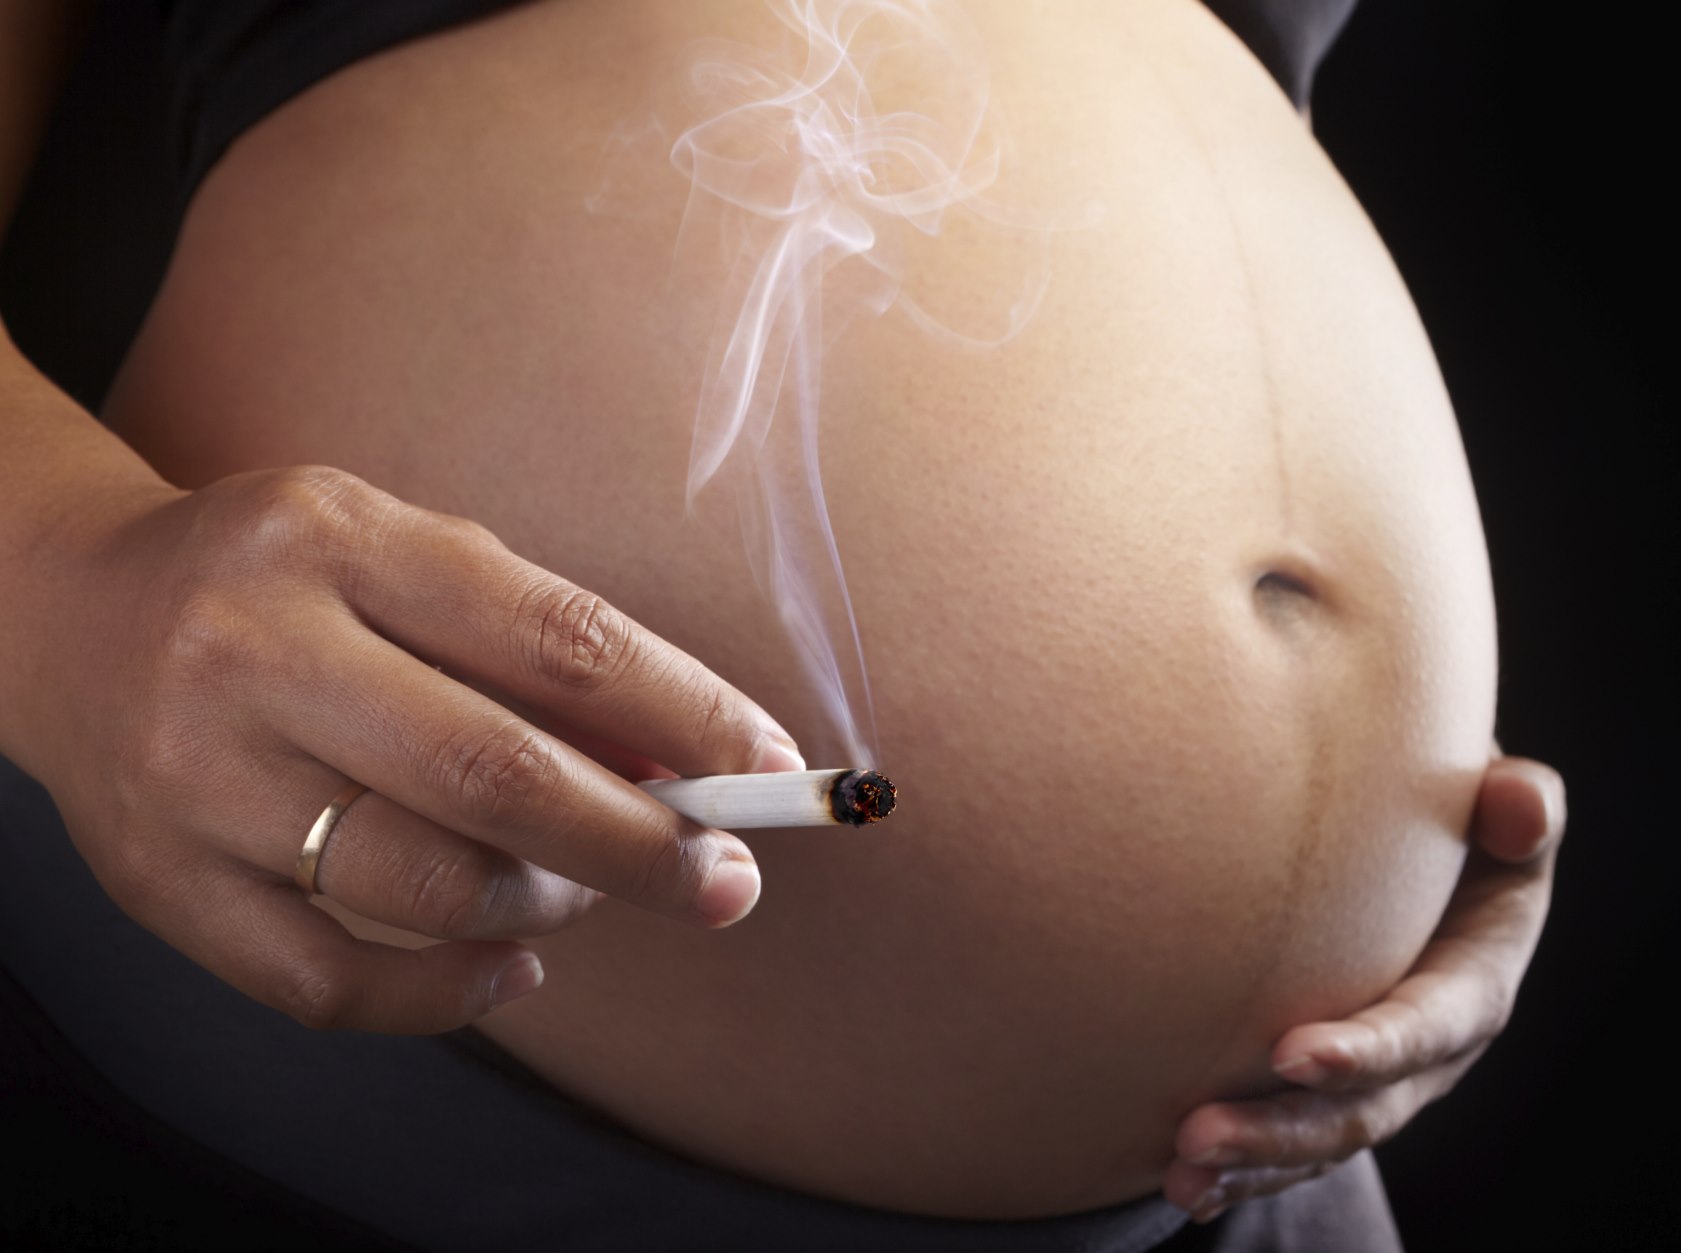 Image: Can air pollution negatively affect the growth of an unborn child?